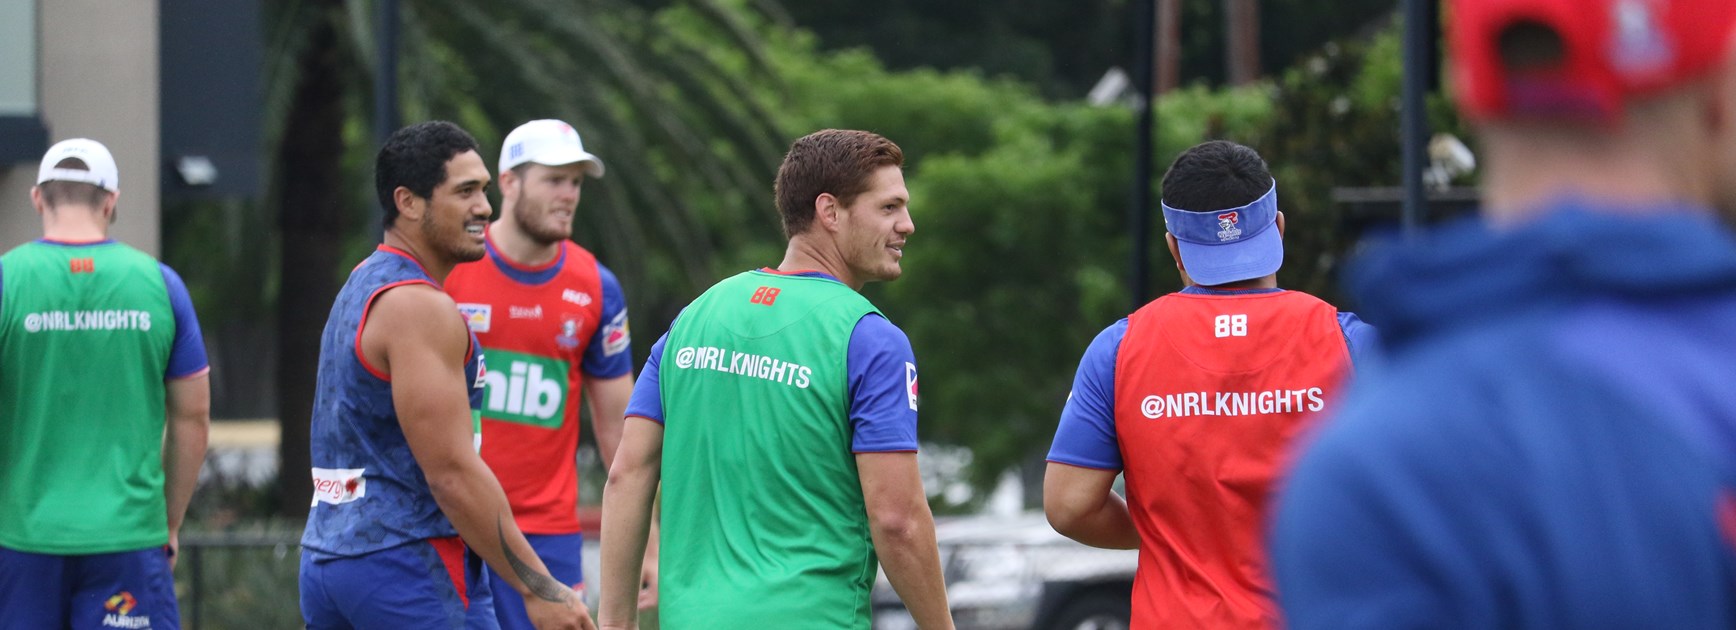 Kalyn Ponga diary: A day in the life of an NRL player